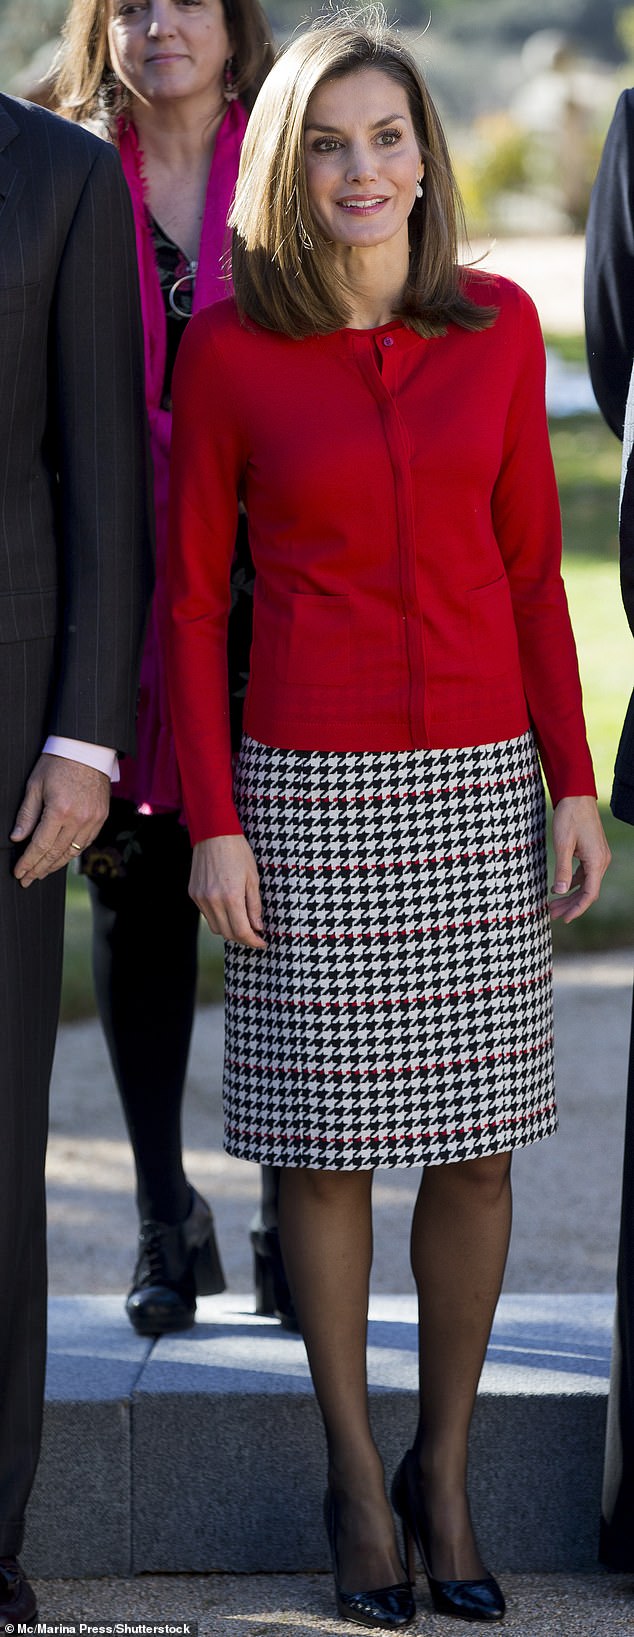 Queen Letizia of Spain draws attention to the red accents of her houndstooth tweed skirt by wearing a red cardigan on the top half.